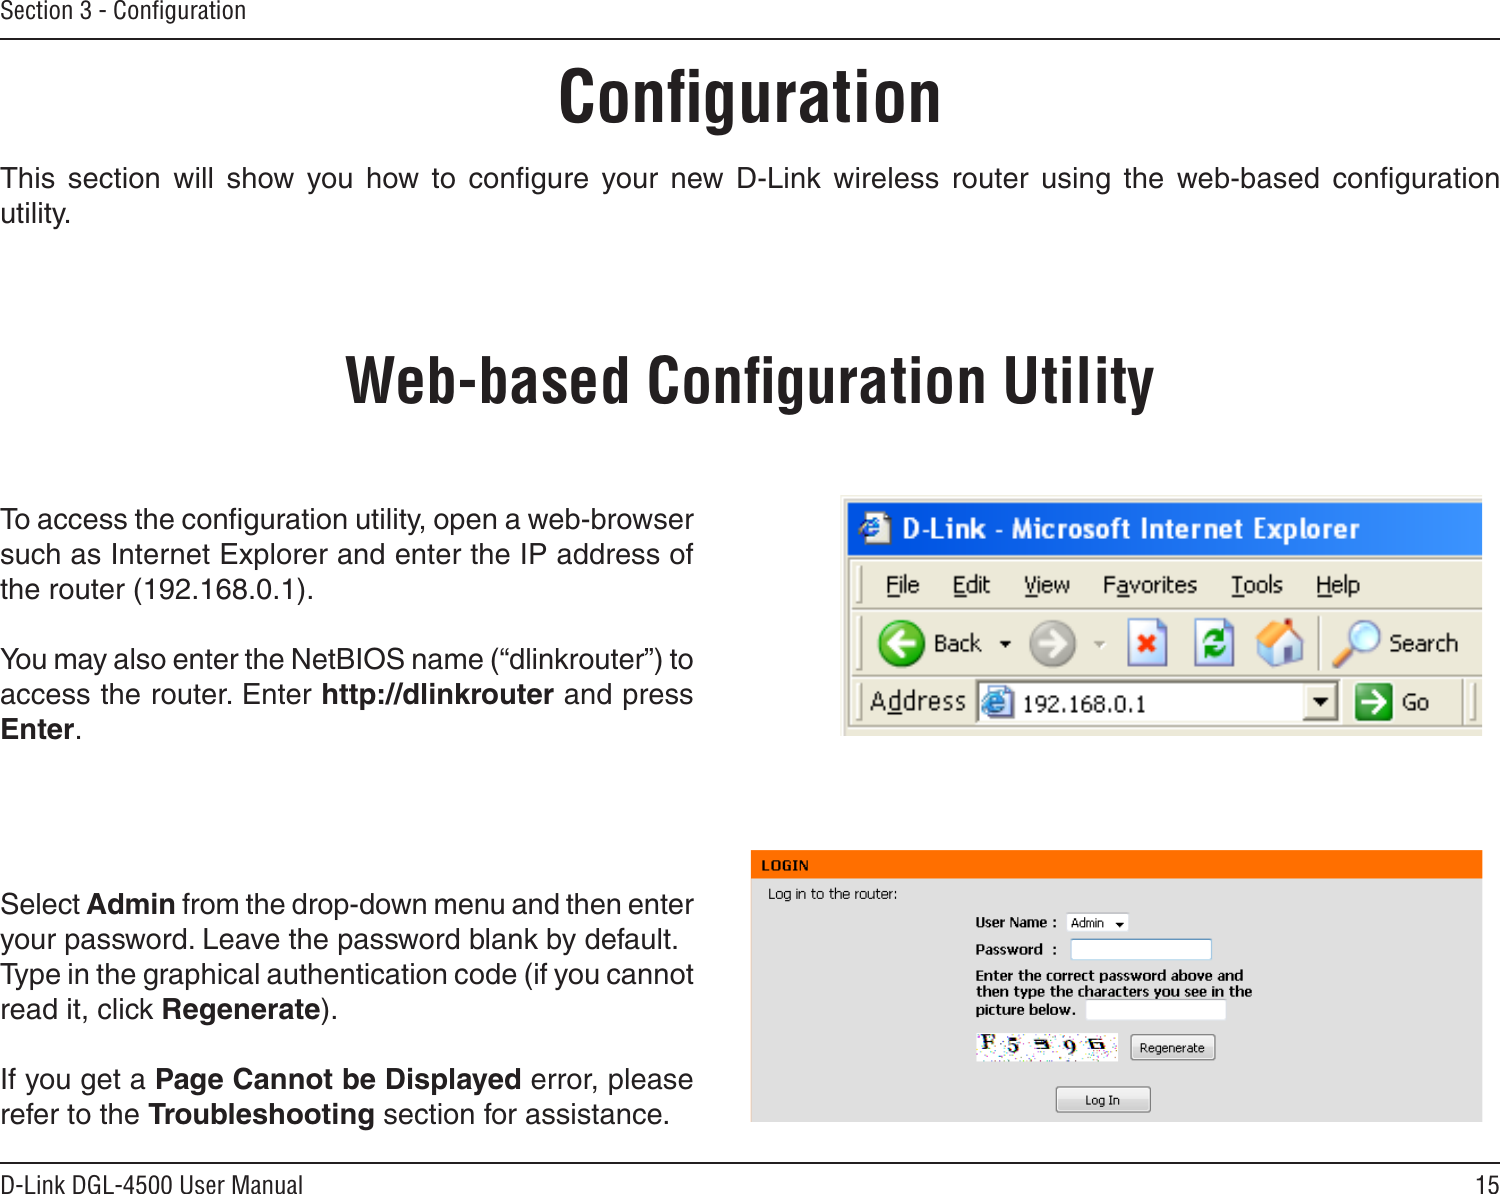 15D-Link DGL-4500 User ManualSection 3 - ConﬁgurationConﬁgurationThis  section  will  show  you  how  to  conﬁgure  your  new  D-Link  wireless  router  using  the  web-based  conﬁguration utility.Web-based Conﬁguration UtilityTo access the conﬁguration utility, open a web-browser such as Internet Explorer and enter the IP address of the router (192.168.0.1).You may also enter the NetBIOS name (“dlinkrouter”) to access the router. Enter http://dlinkrouter and press Enter. Select Admin from the drop-down menu and then enter your password. Leave the password blank by default.Type in the graphical authentication code (if you cannot read it, click Regenerate).If you get a Page Cannot be Displayed error, please refer to the Troubleshooting section for assistance.